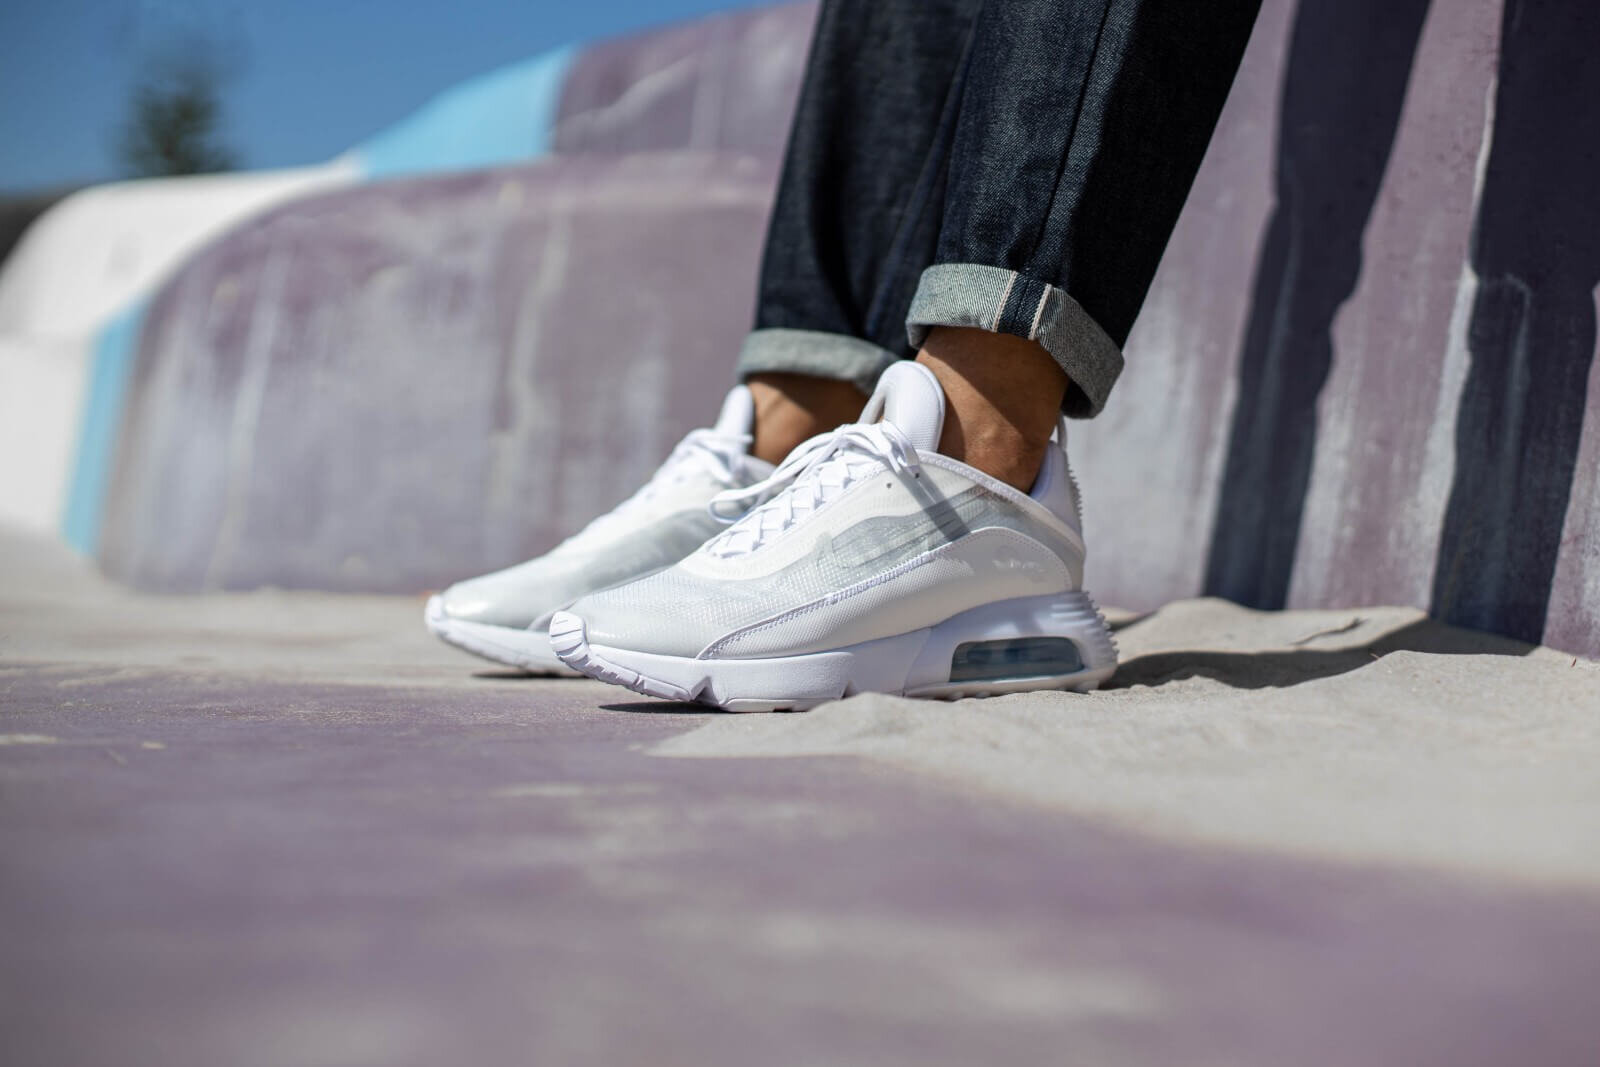 The Nike Air Max 2090 'Wolf Grey/Pure Platinum' Is On Sale For 43 ...